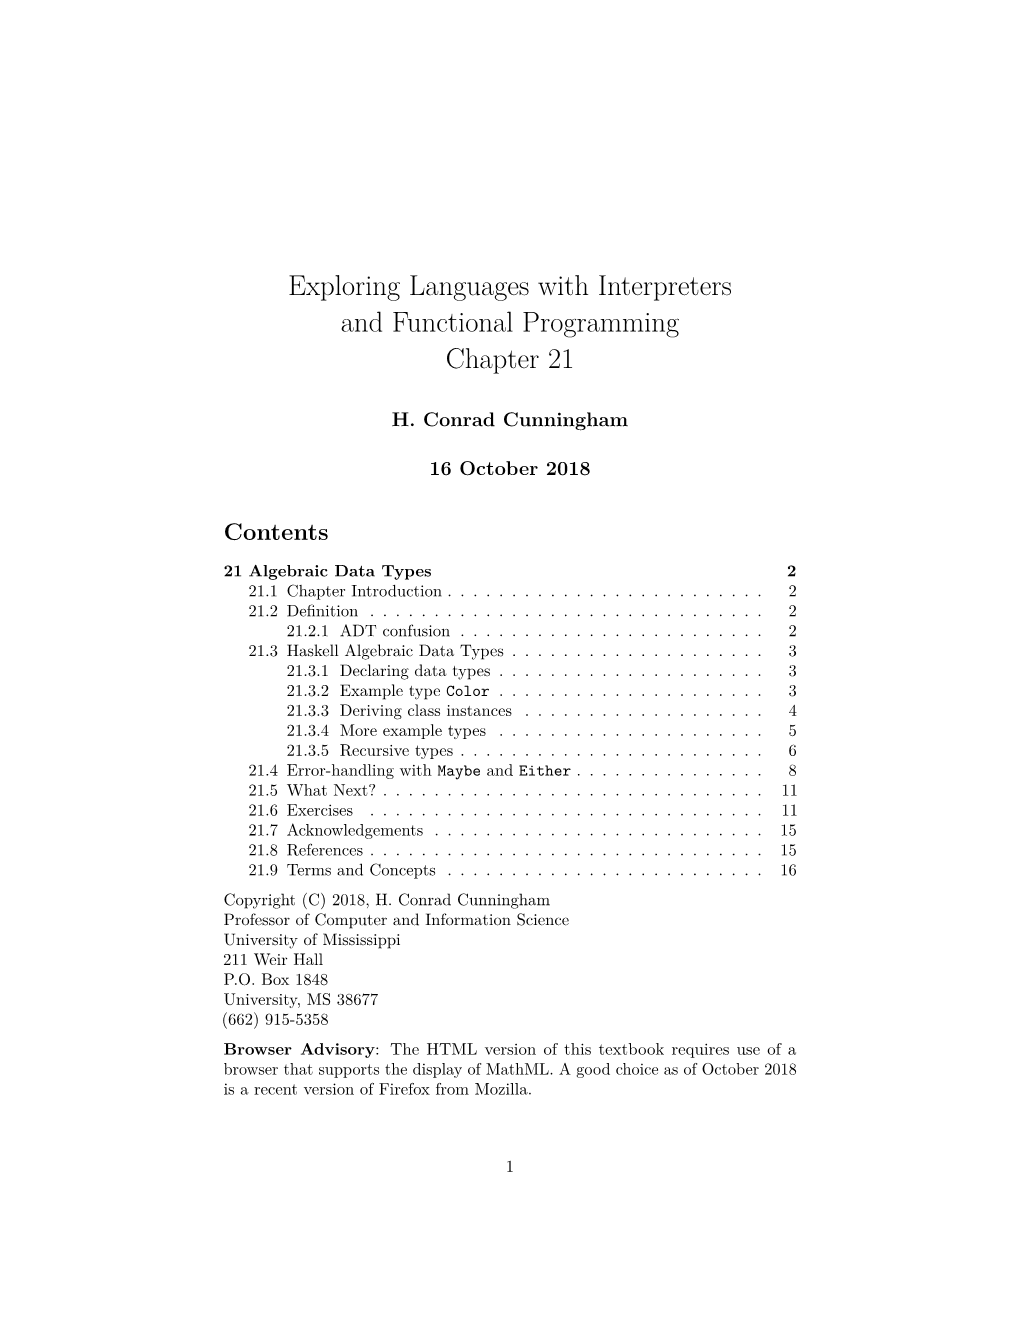 Exploring Languages with Interpreters and Functional Programming Chapter 21